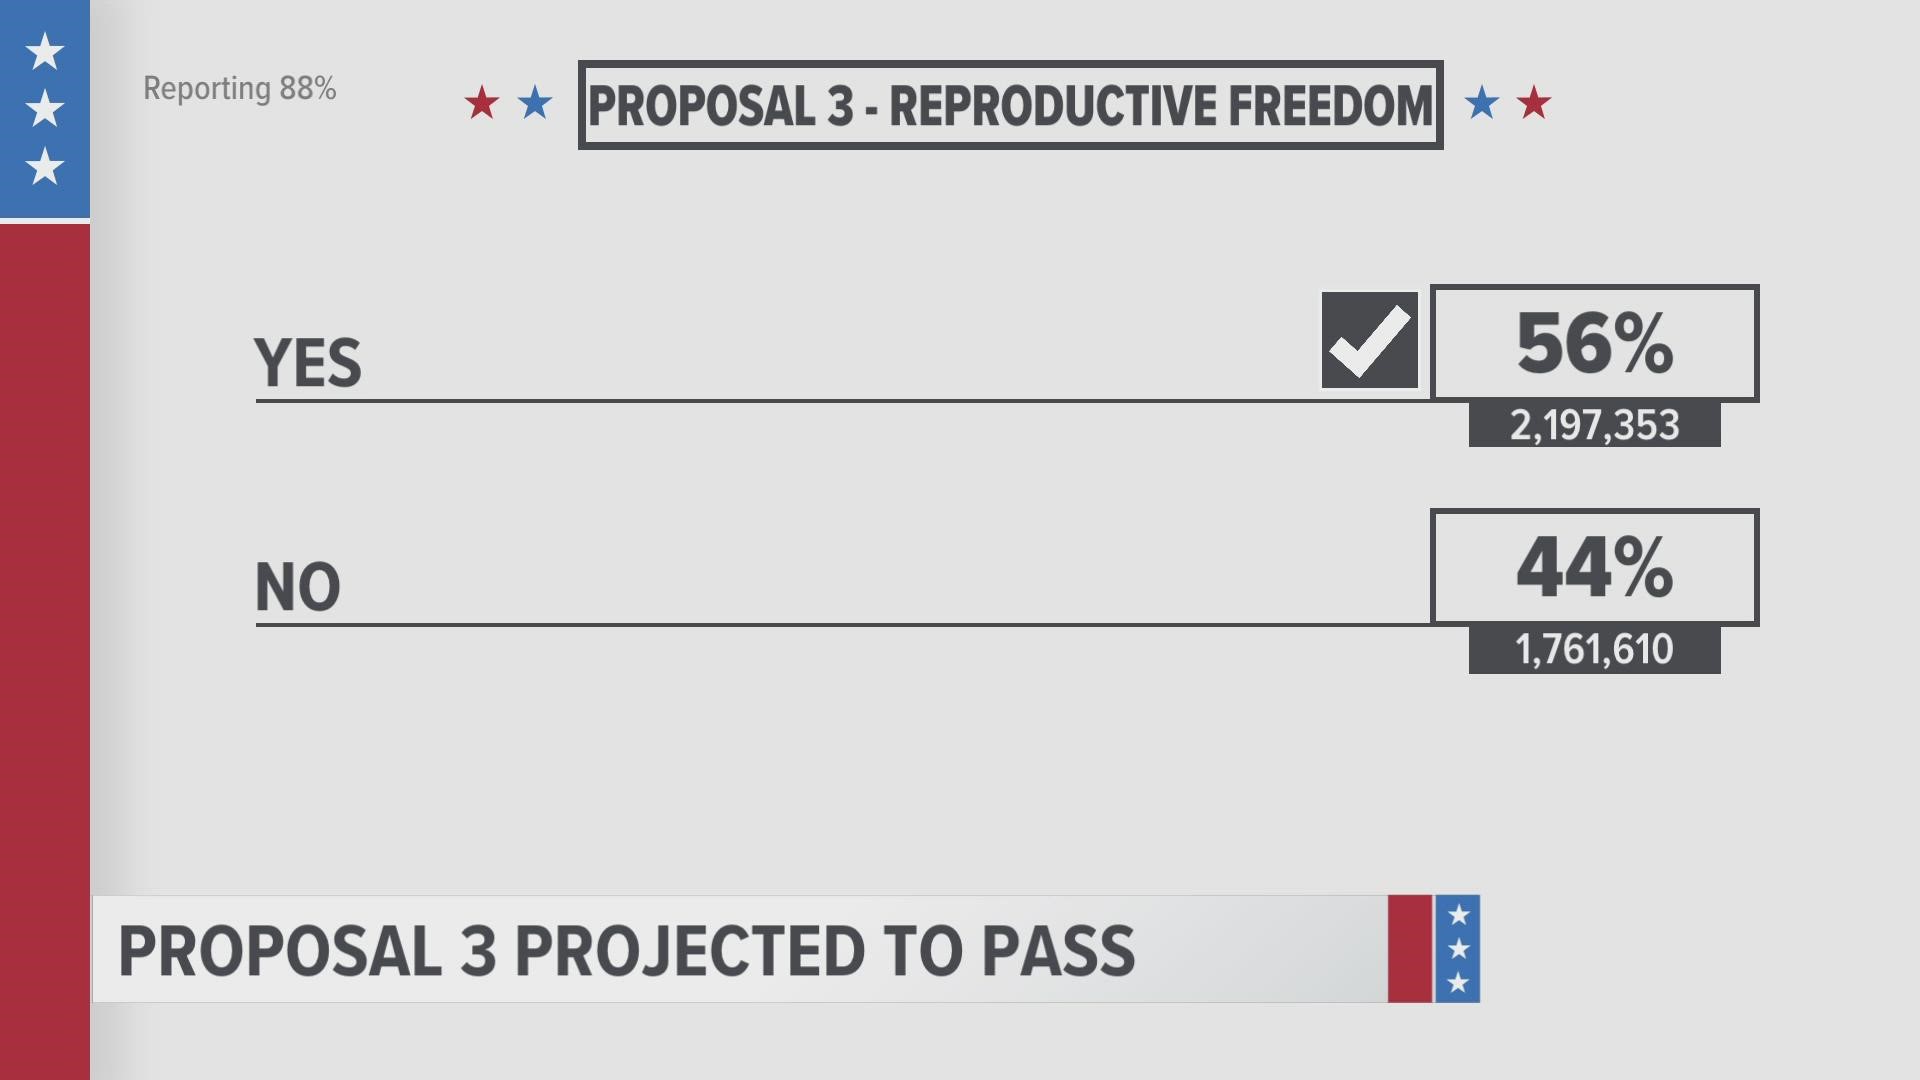 Proposal 3 has passed with 55% of the votes, and Proposals 1 and 2 are expected to pass as results come in.